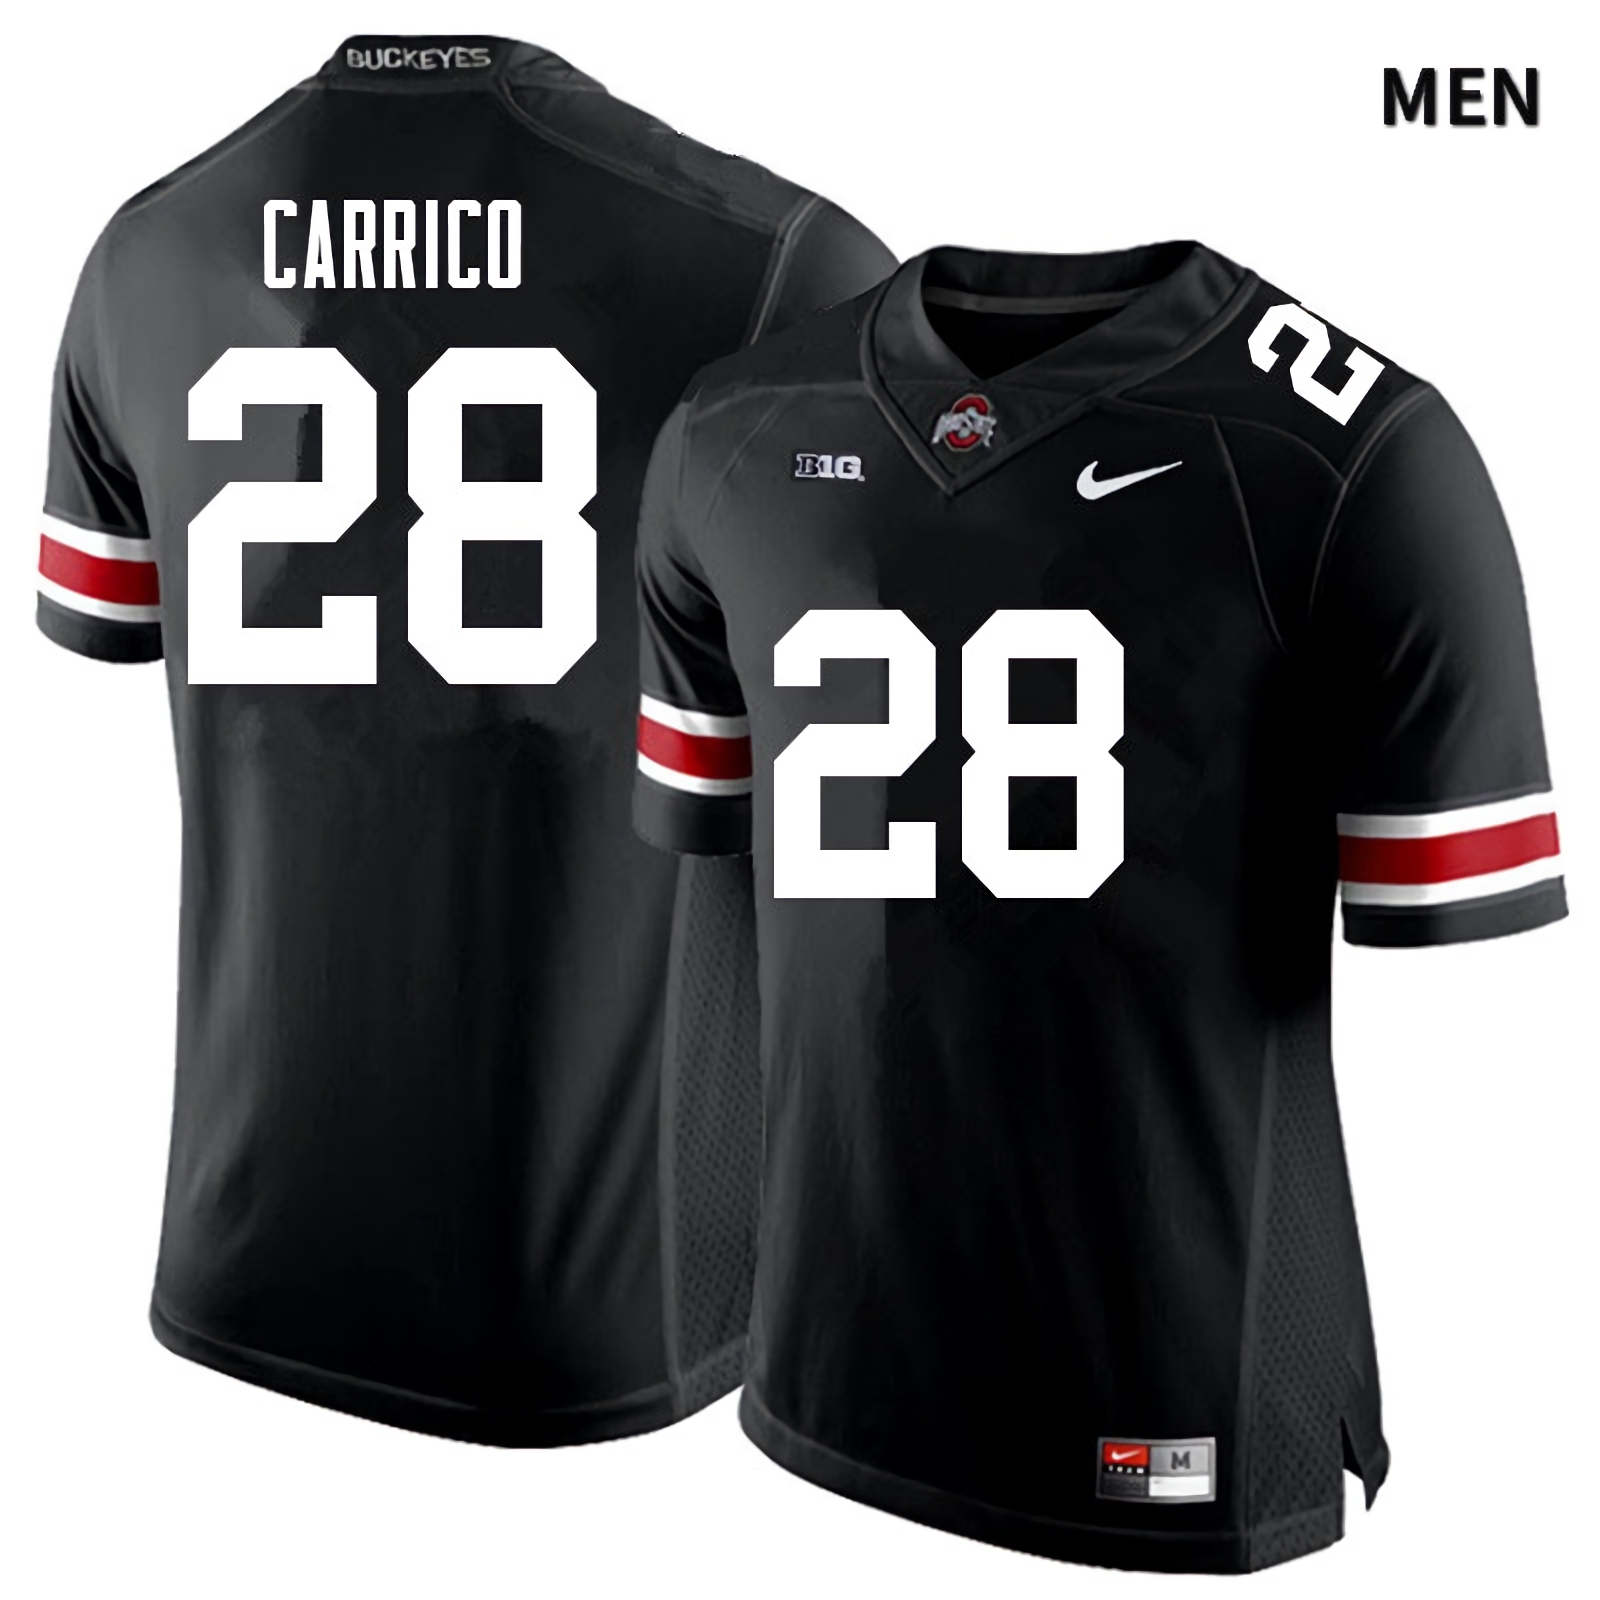 Reid Carrico Ohio State Buckeyes Men's NCAA #28 Black White Number College Stitched Football Jersey QHE5356MD